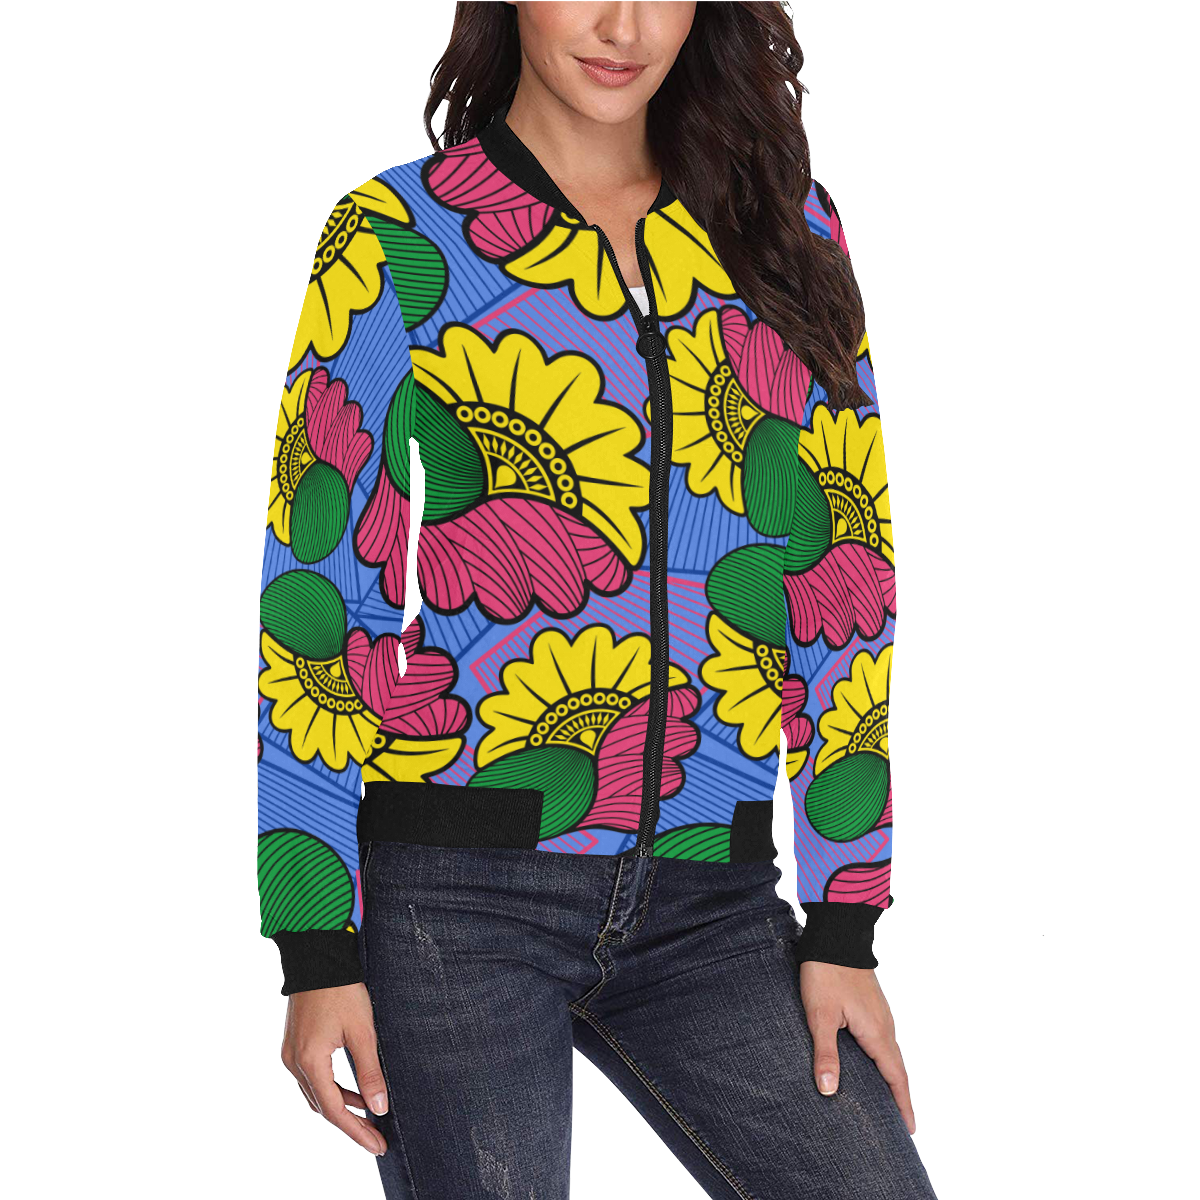 Jacket Wax 1 All Over Print Bomber Jacket for Women (Model H36)